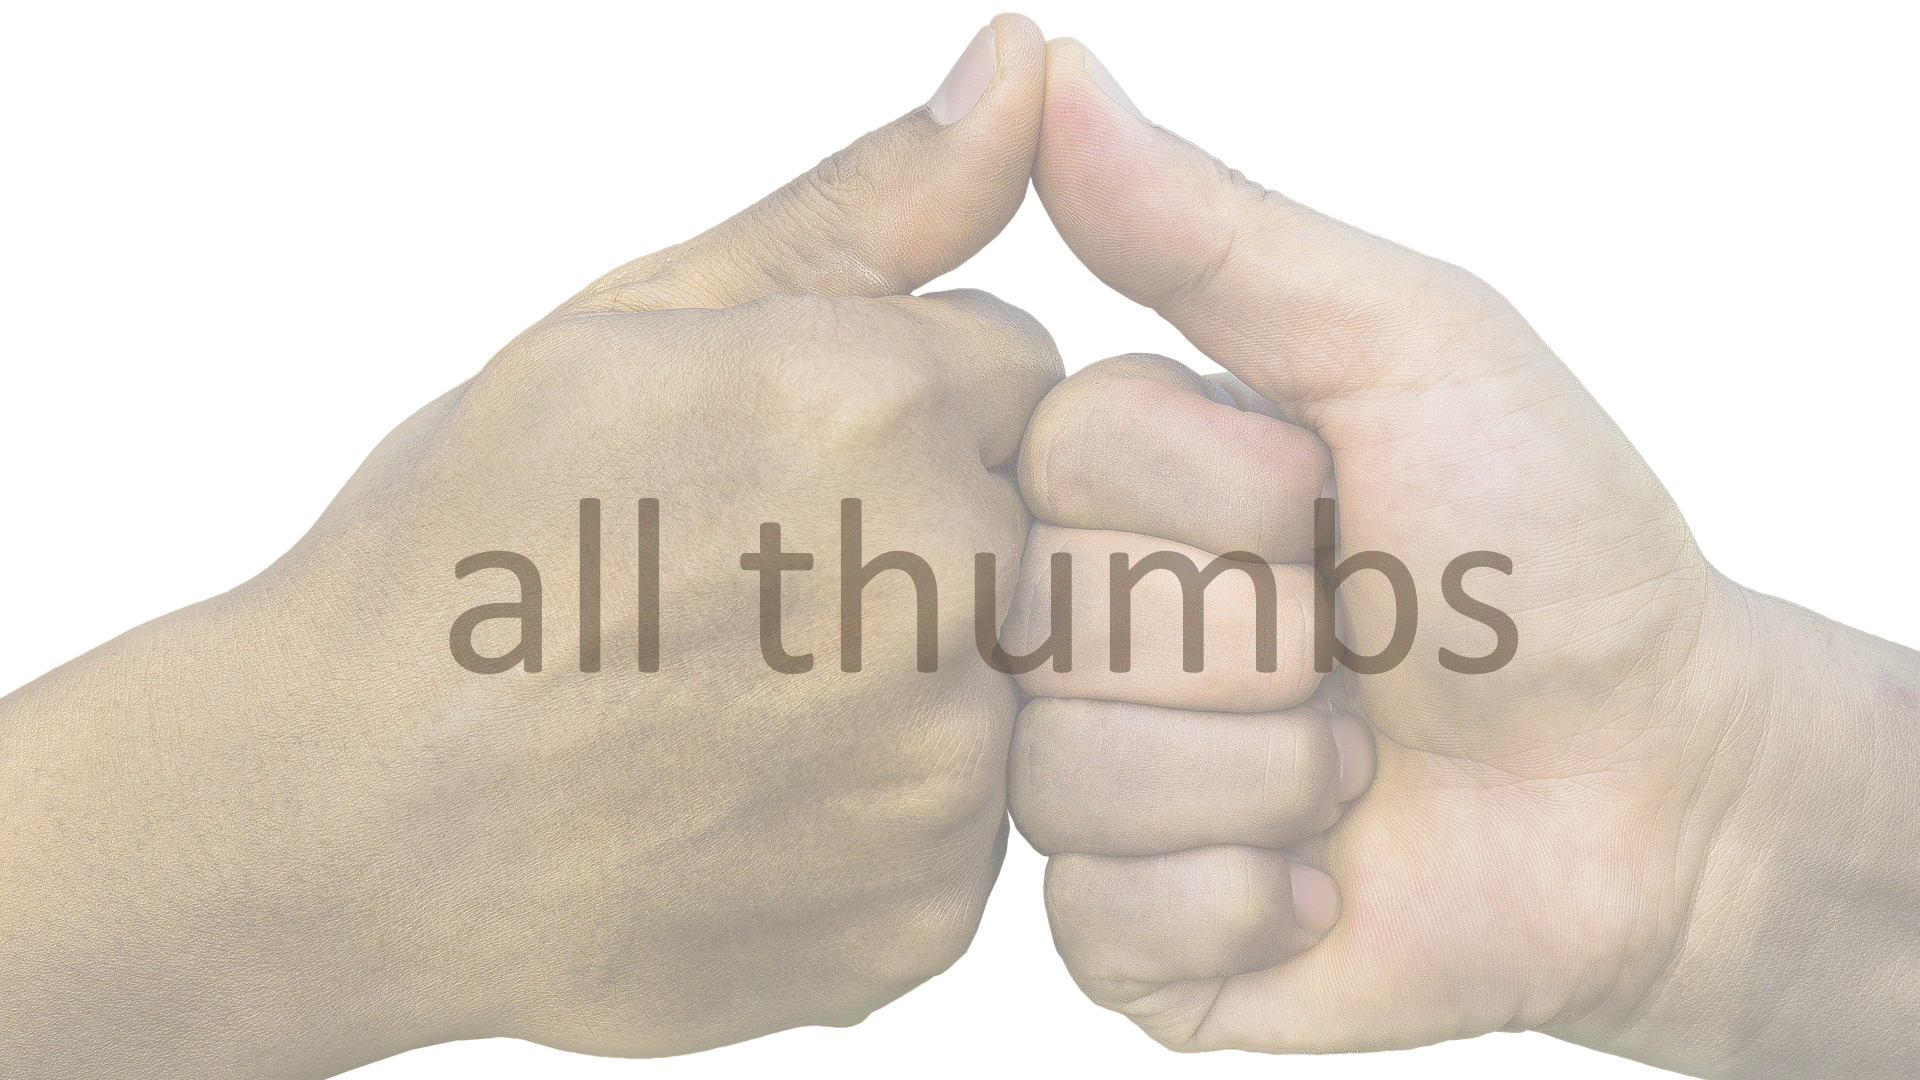 ten thumbs meaning